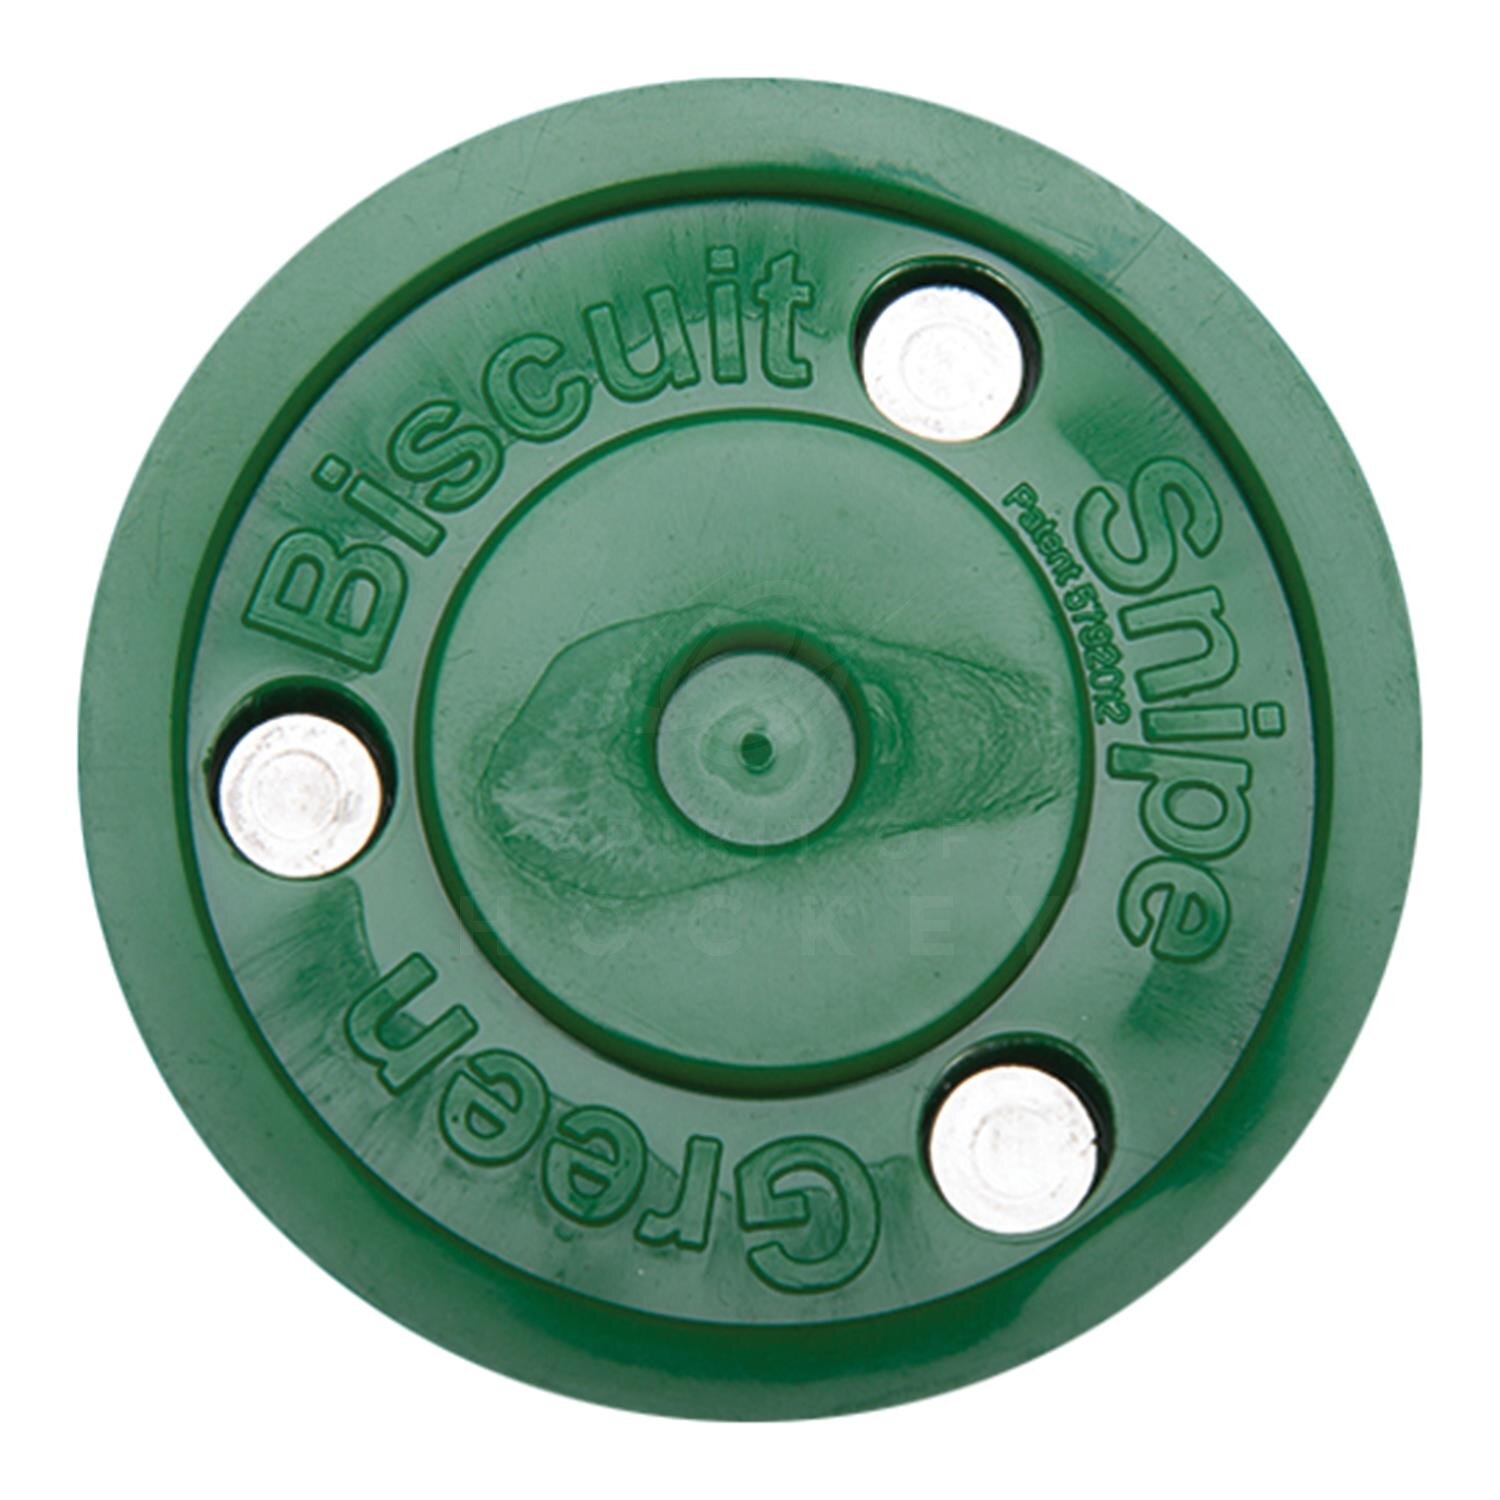 Green Biscuit SAUCE Off Ice Street Hockey Training Puck 